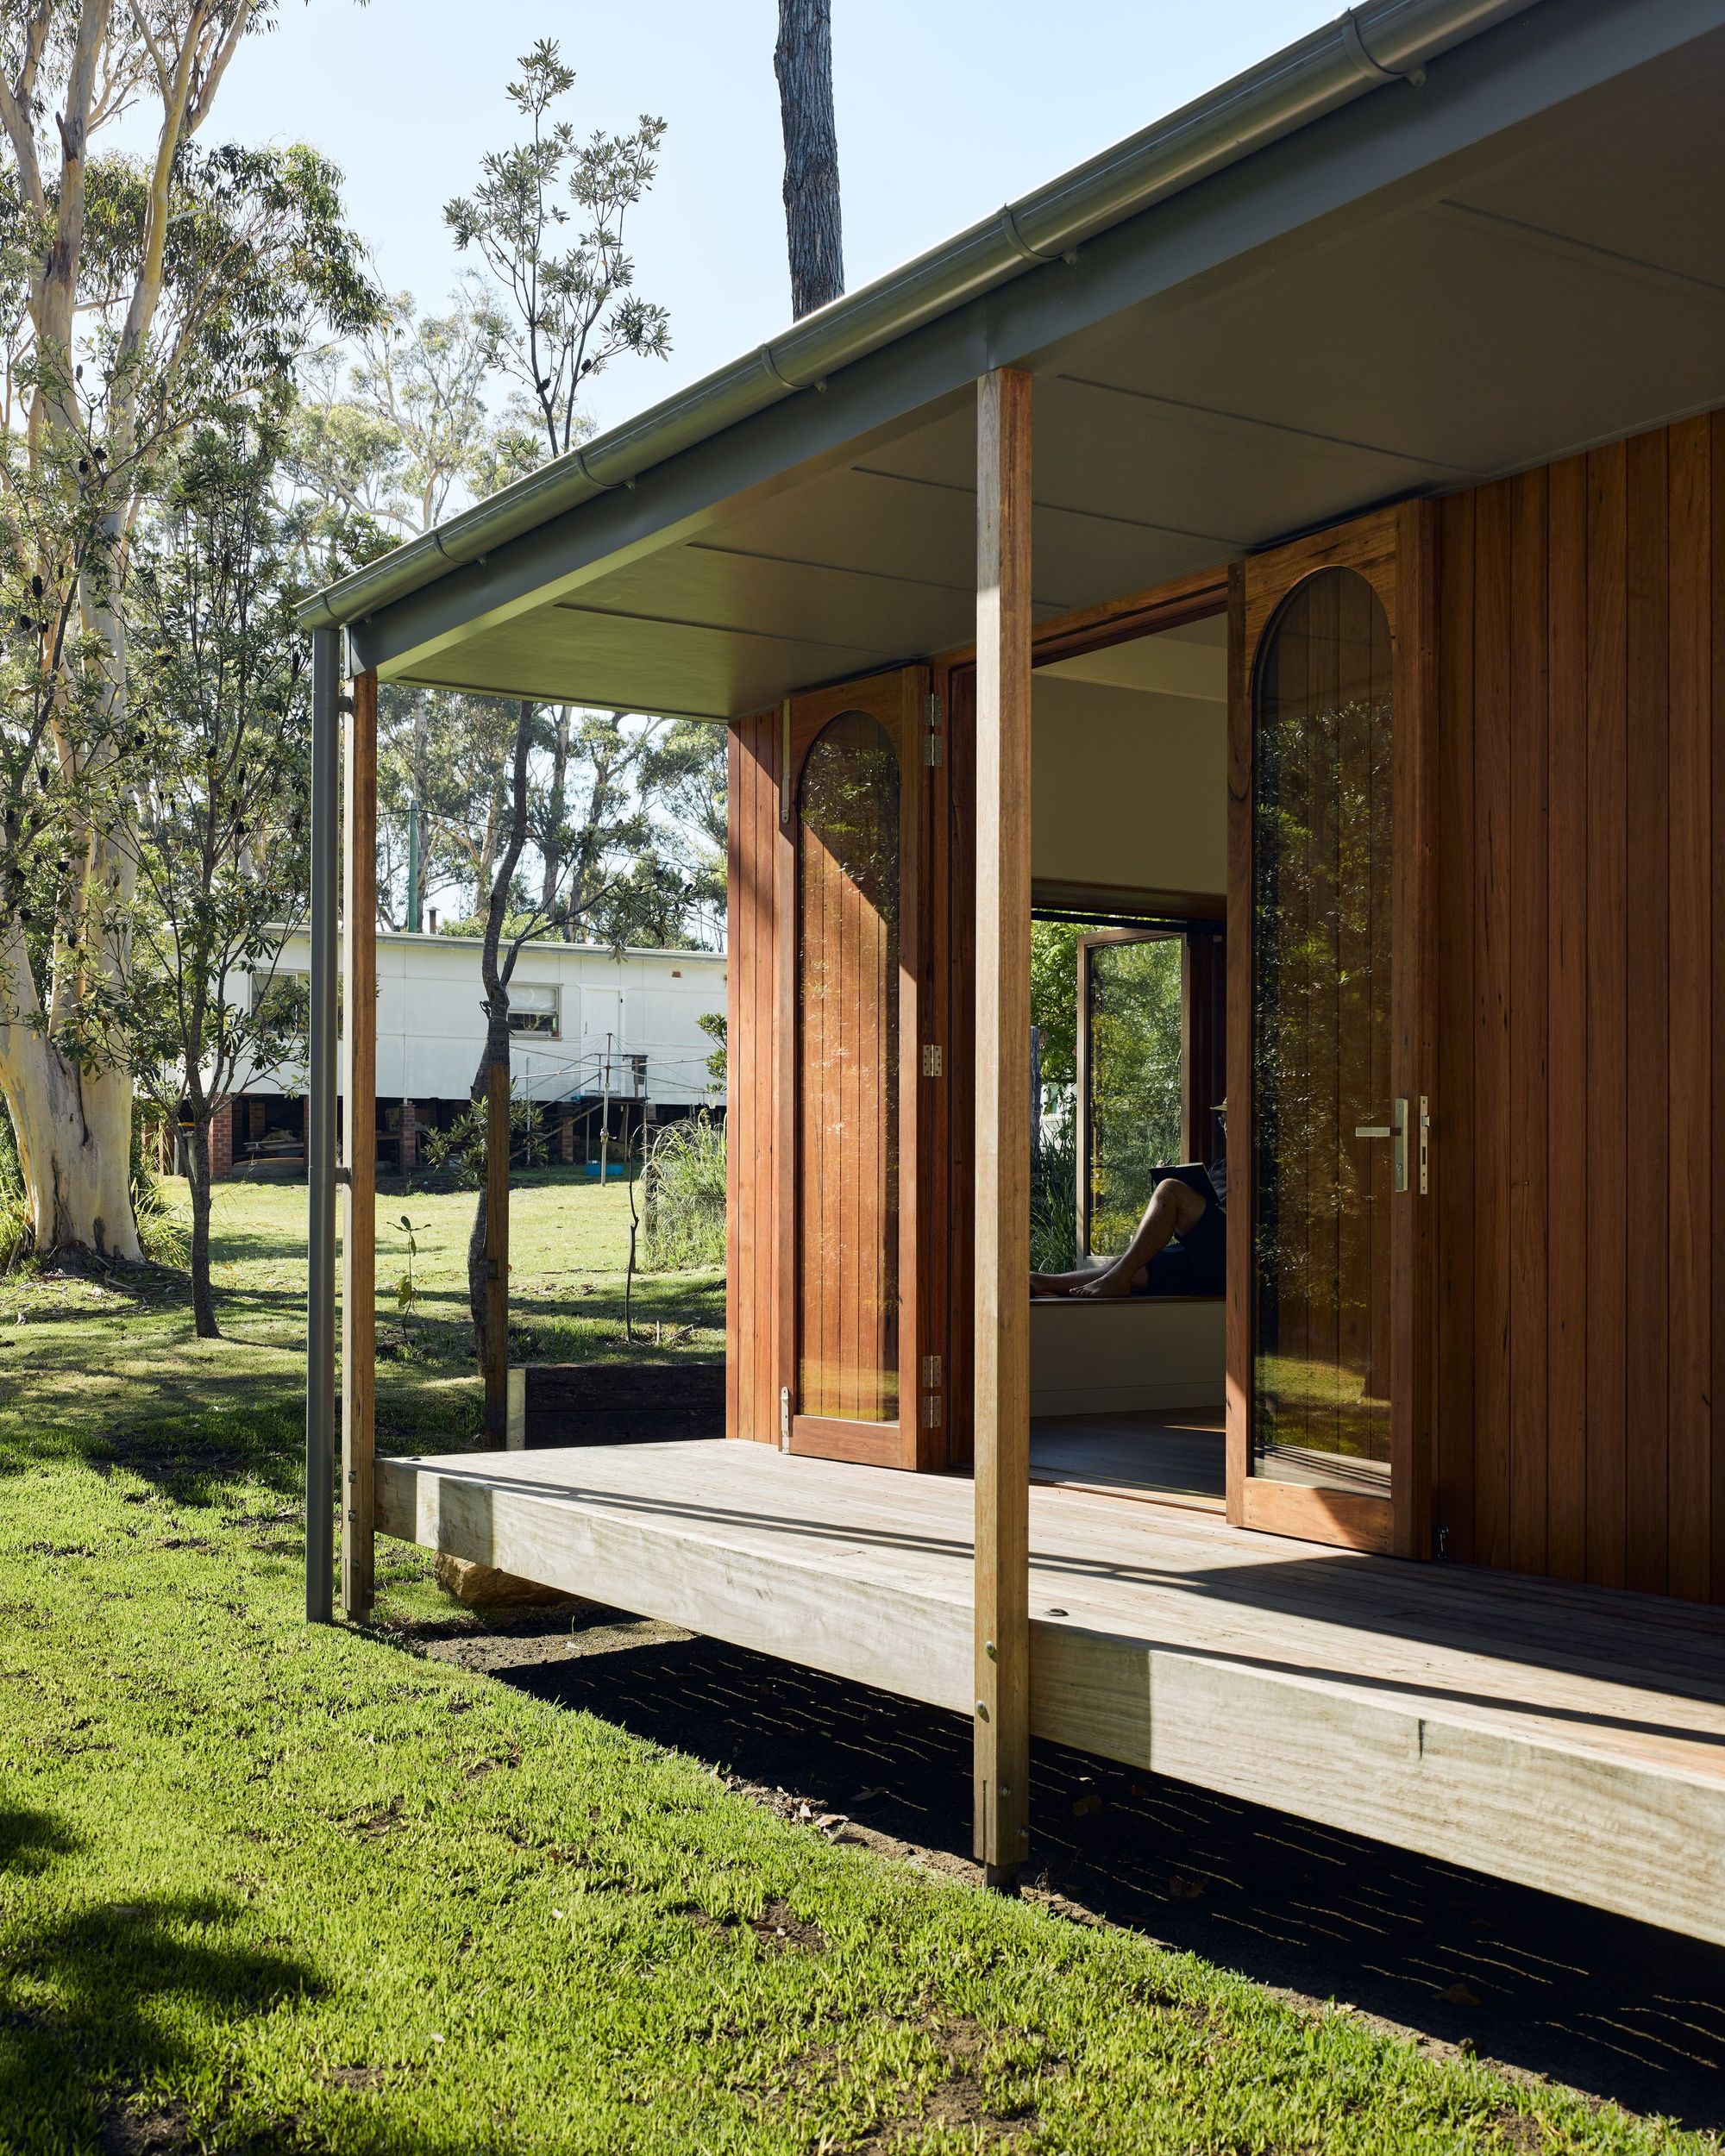 Re-Generation House by Alexander Symes Architect showing timber deck and timber doors